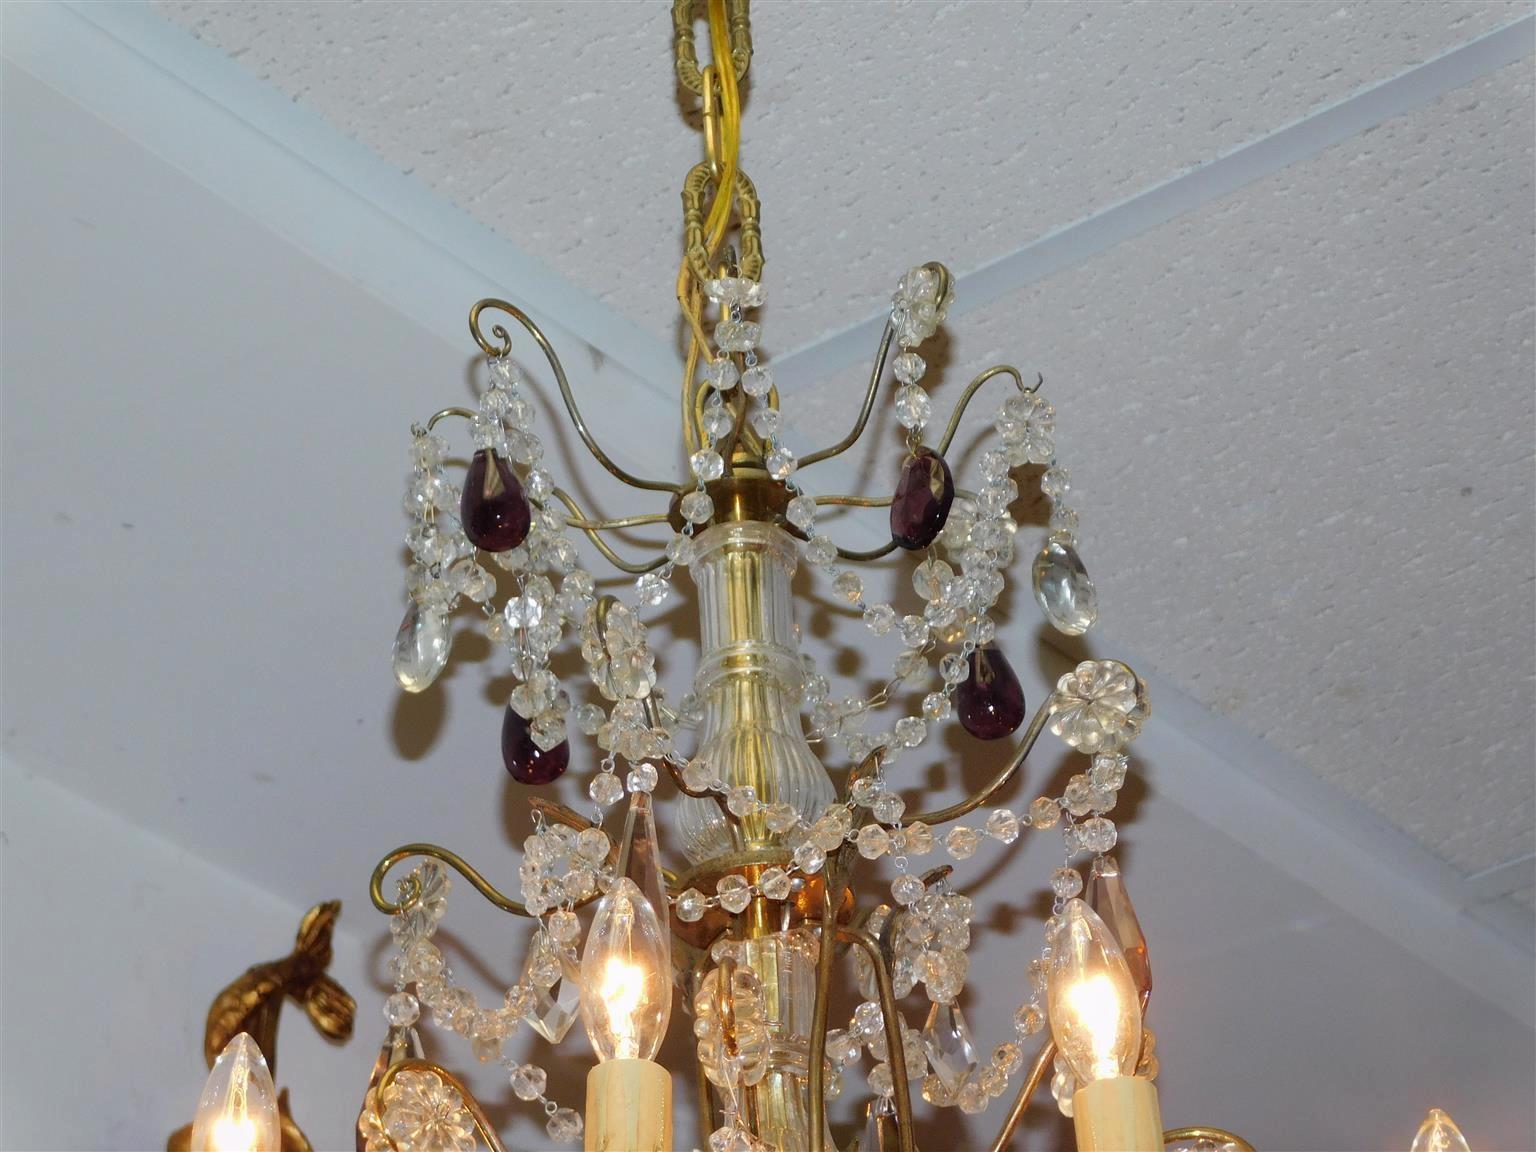 French bronze and crystal eight scrolled arms amethyst prism chandelier with a fluted central bulbous column, floral medallions, and crystal ball finial. Chandelier was originally candle powered and has been electrified. Mid-19th century.